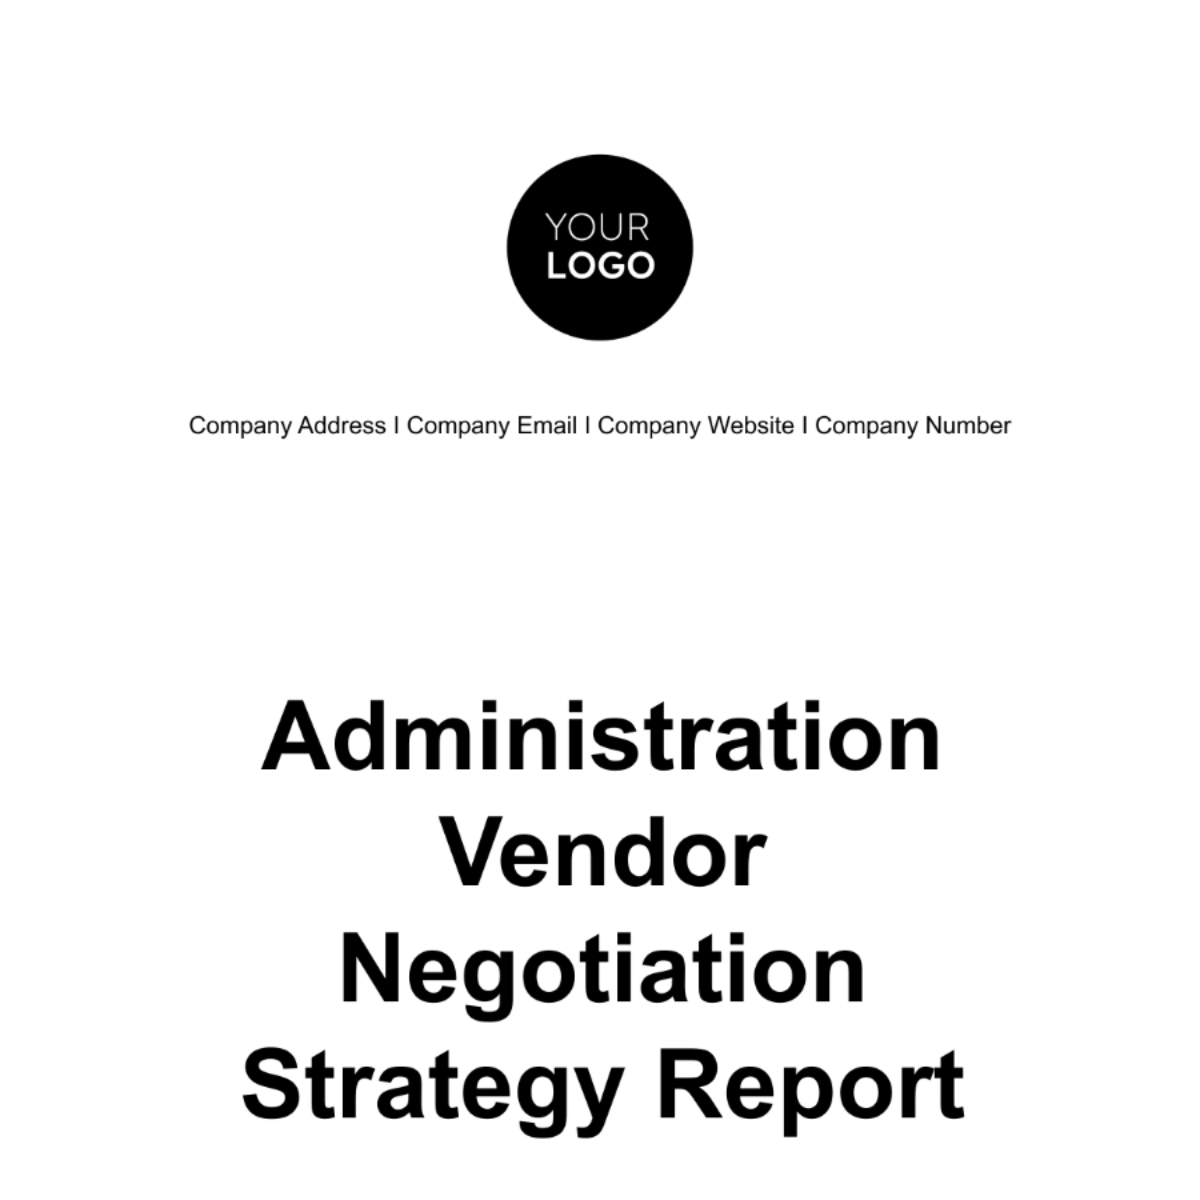 Free Administration Vendor Negotiation Strategy Report Template